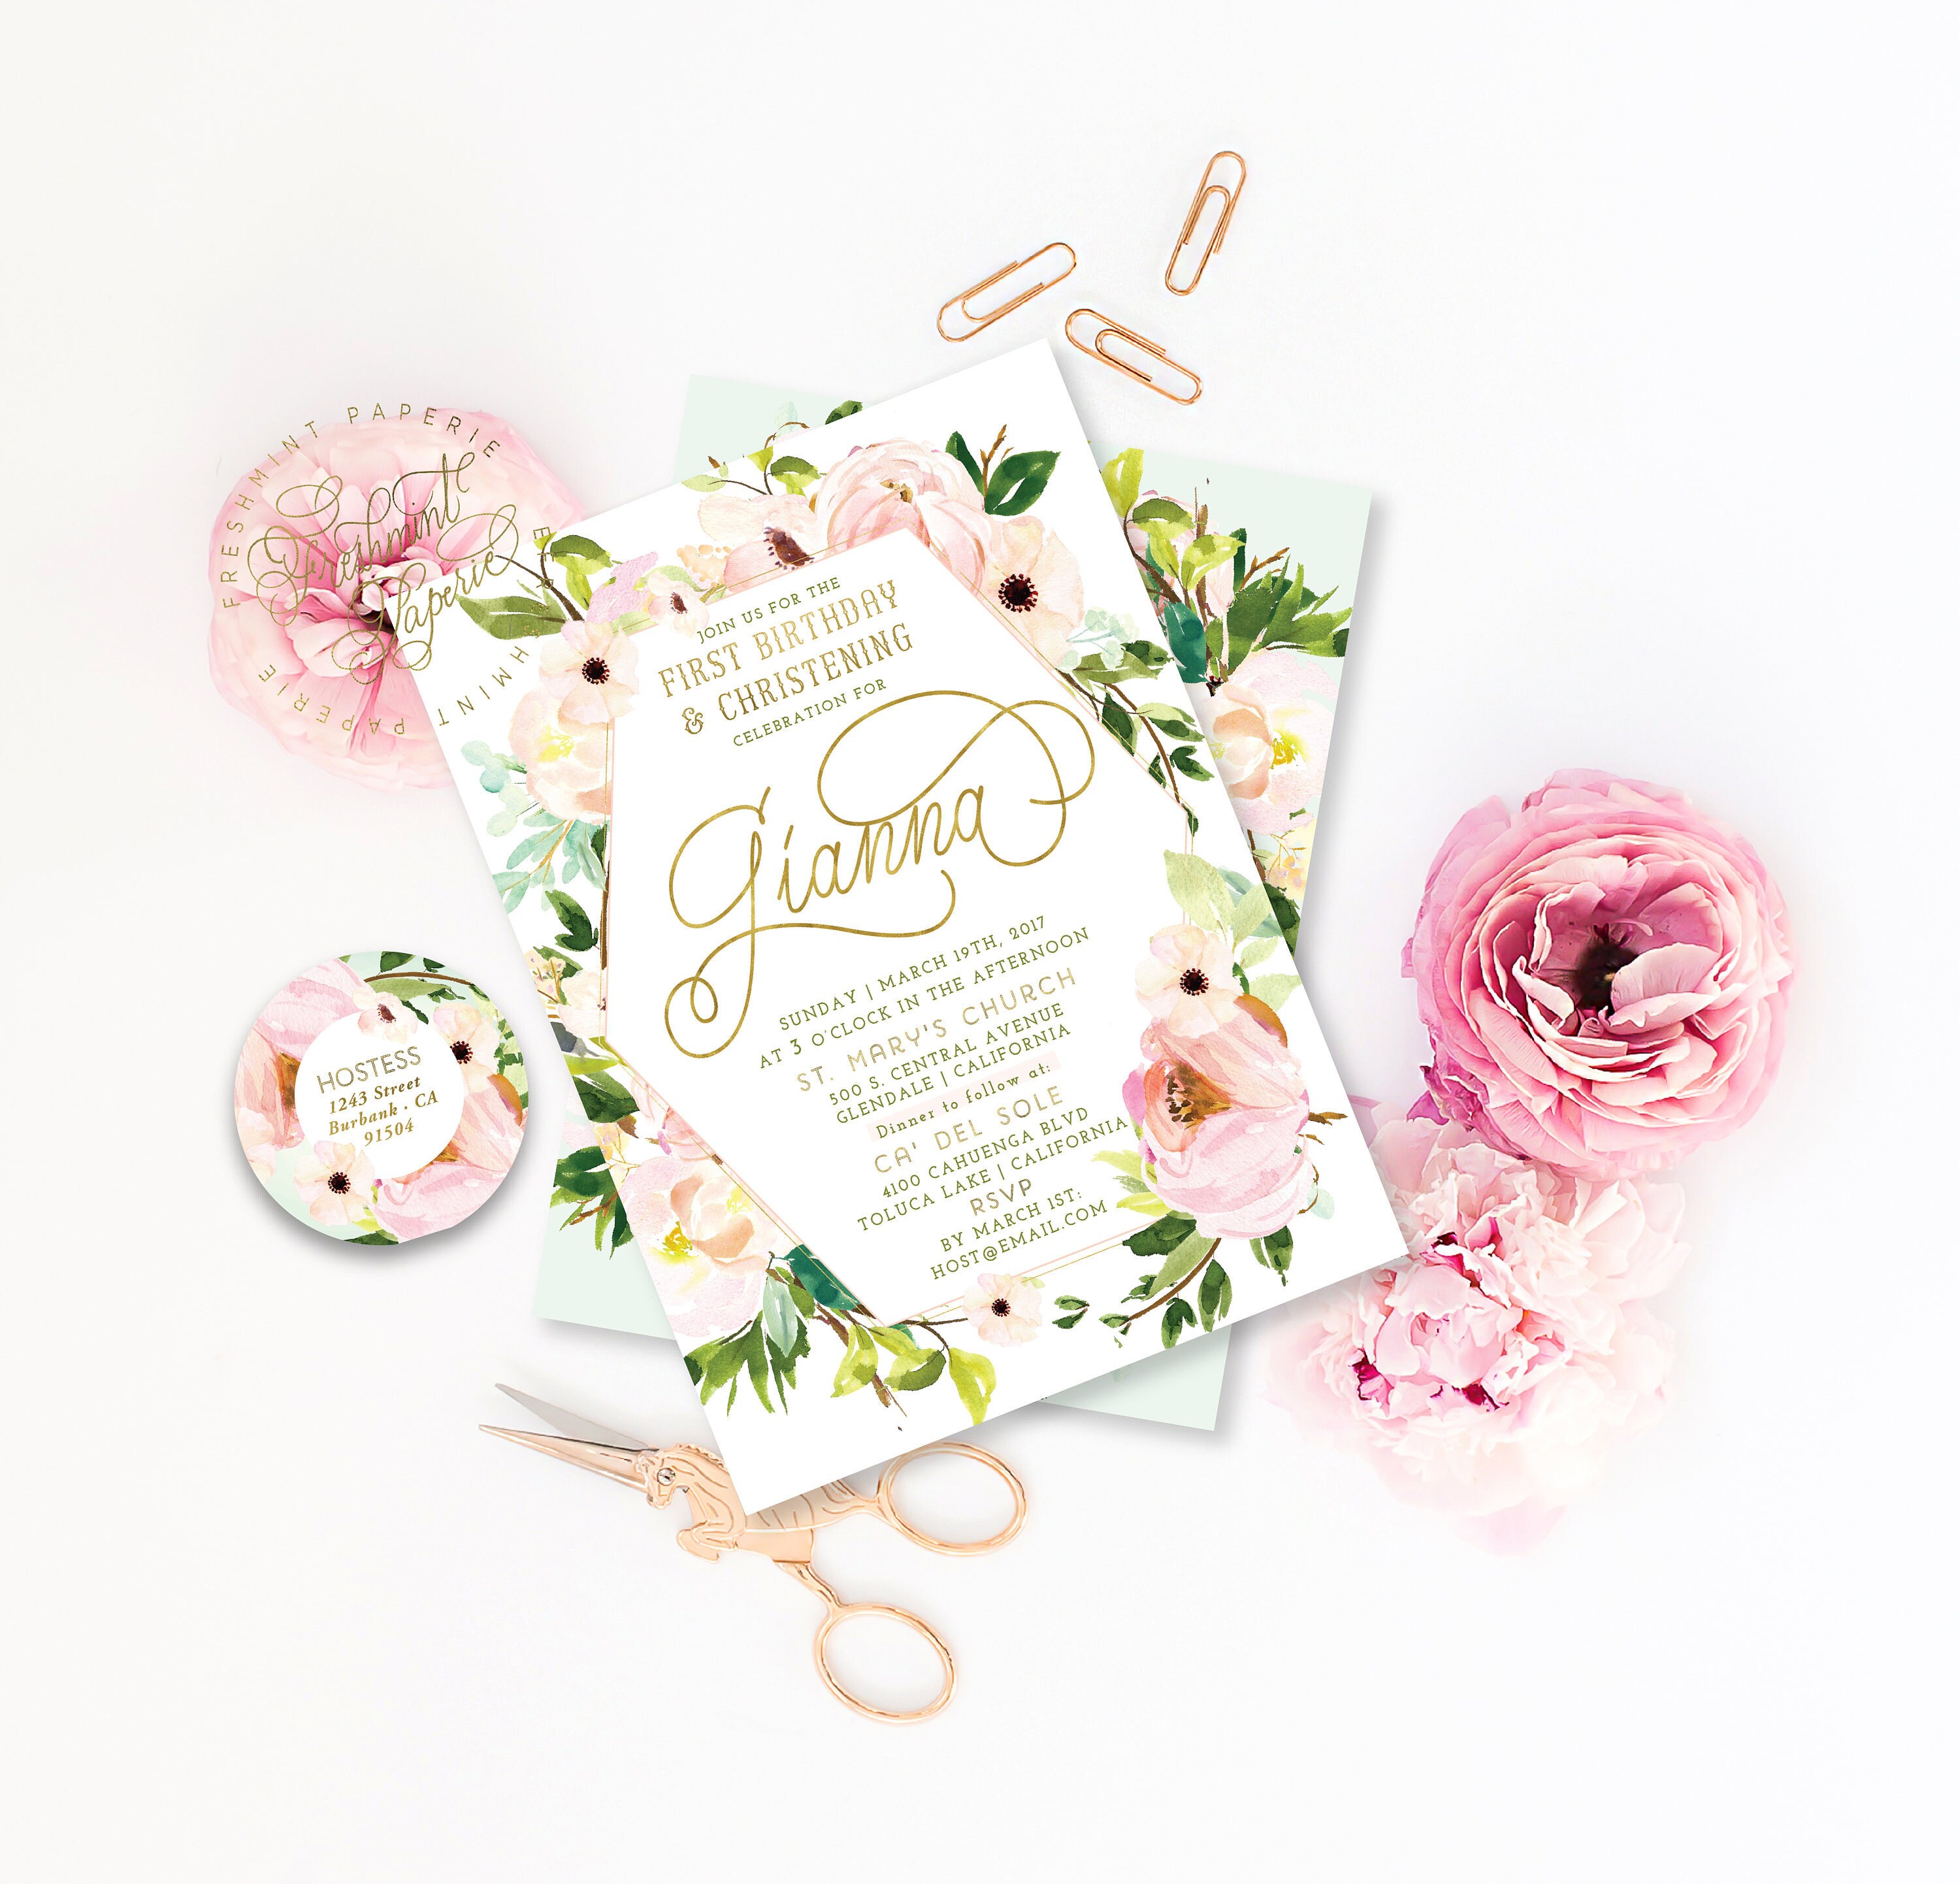 Printable Invitations | Baptism Invitation Calligraphy Floral Freshmint Paperie